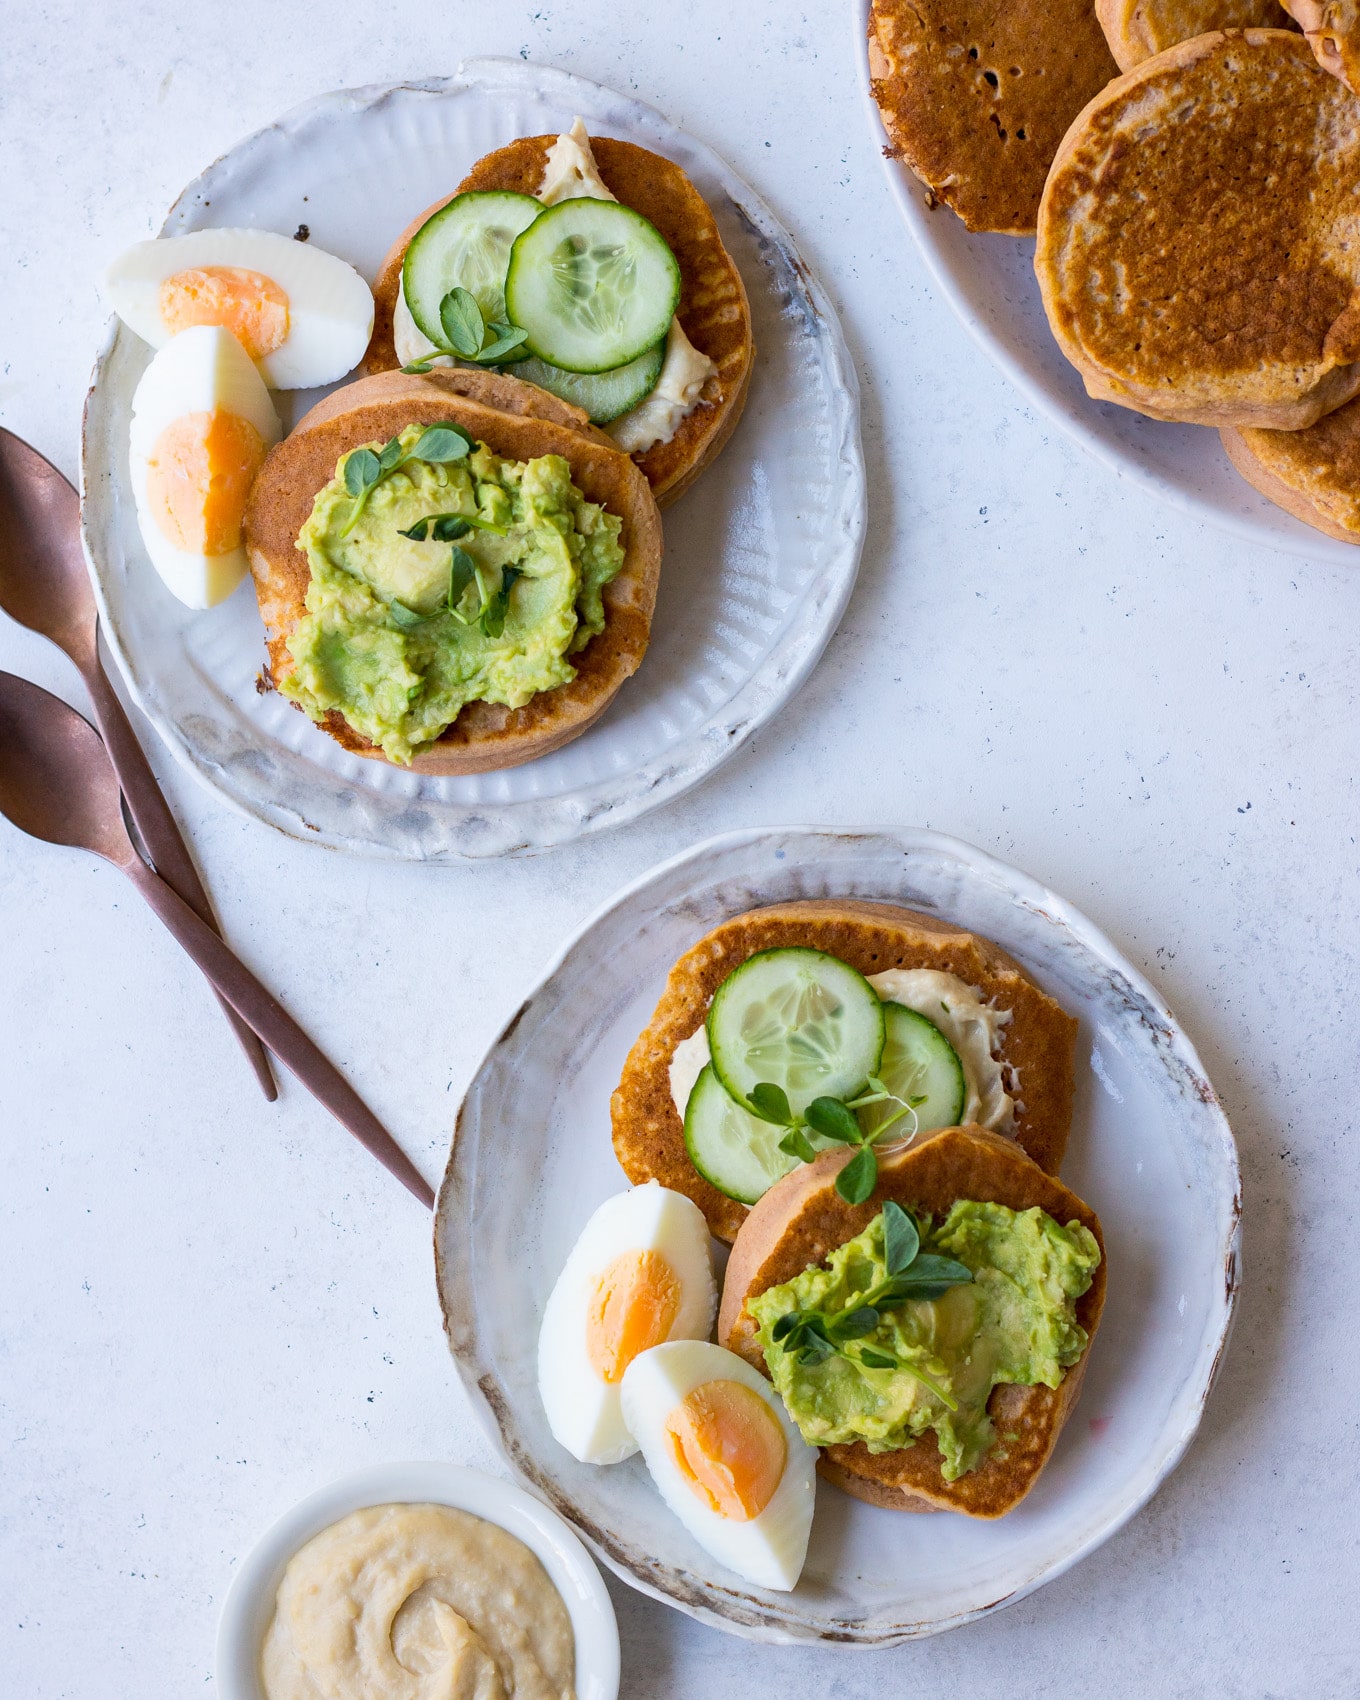 Sweet potato pikelets made with buckwheat flour on Nourish Every Day Blog